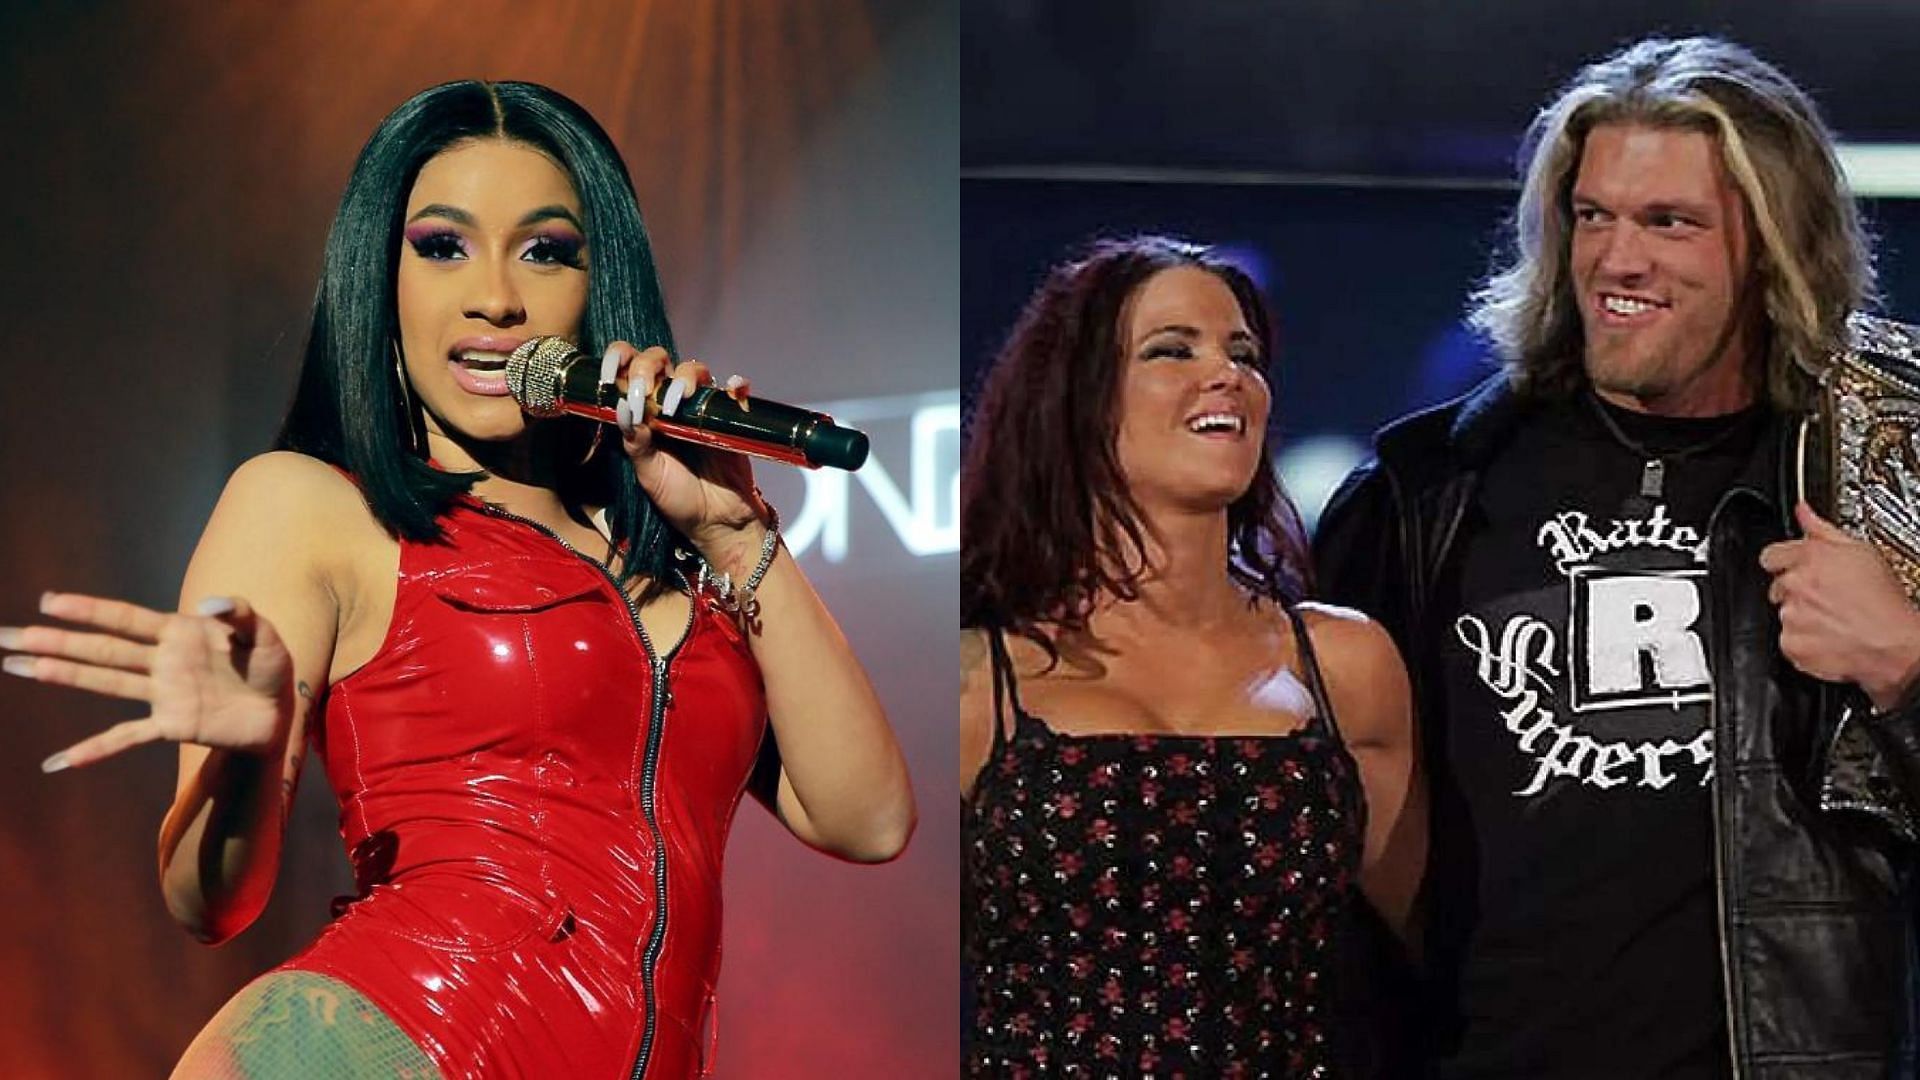 Cardi B took to social media to praise an iconic WWE couple